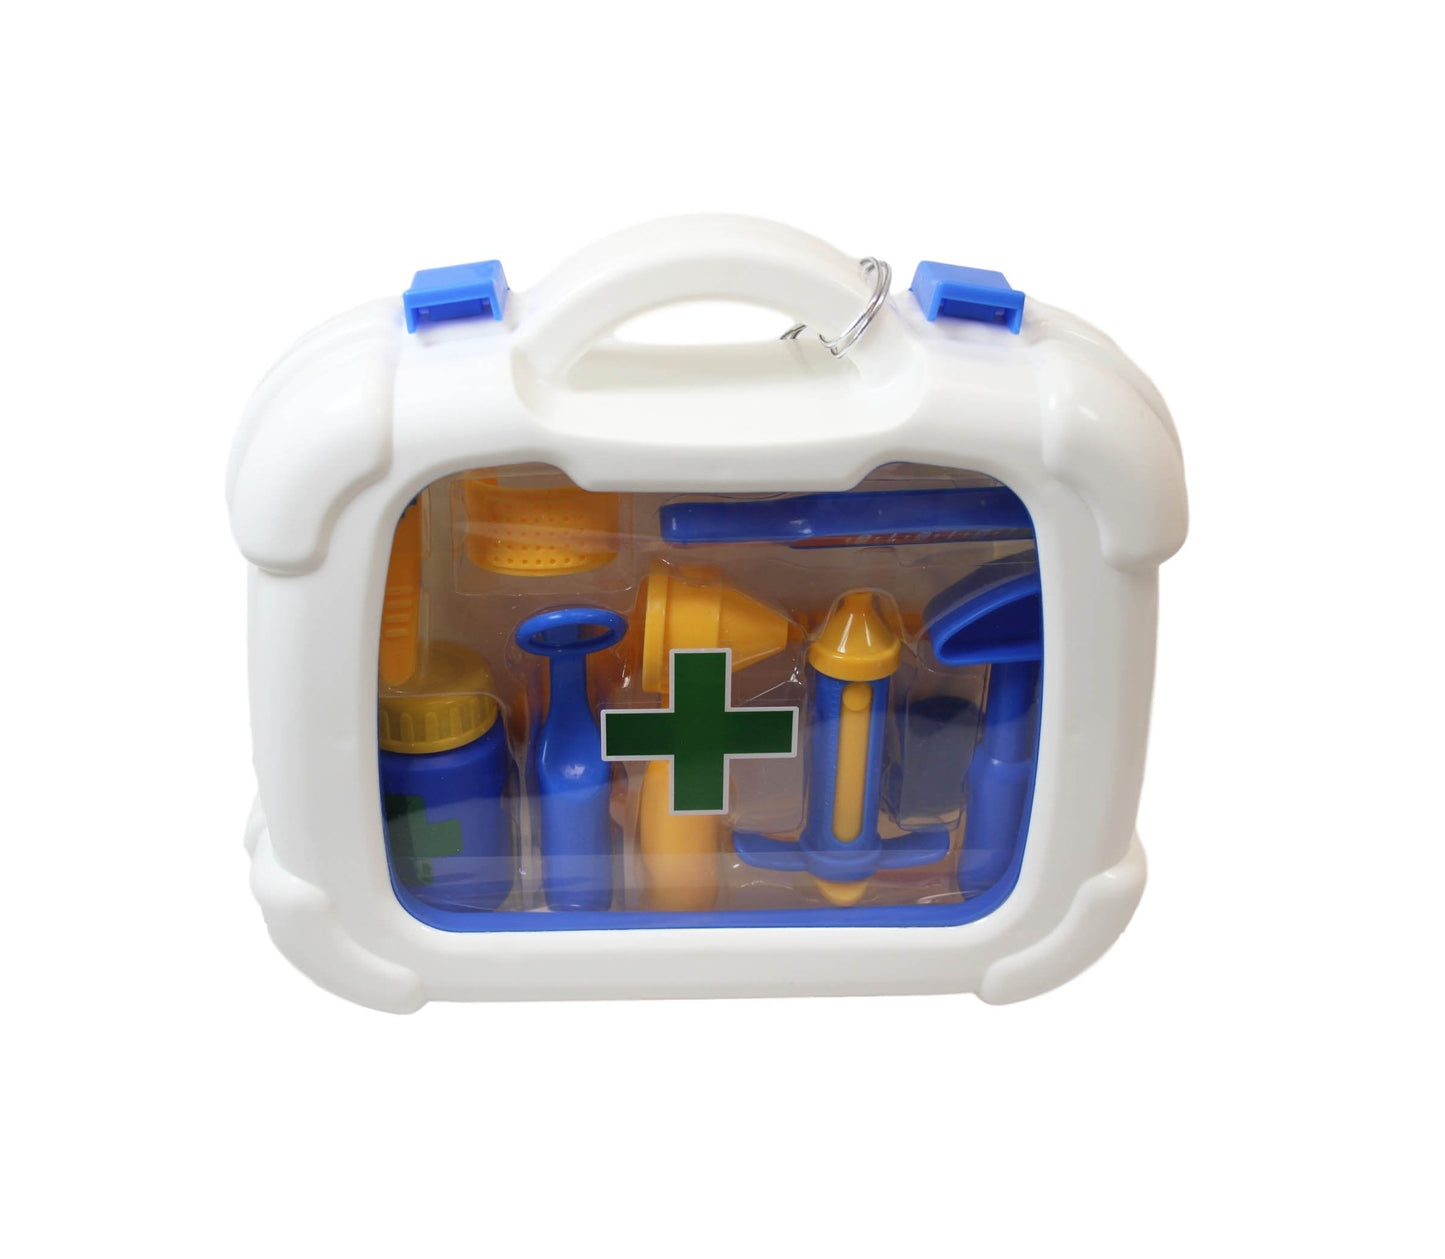 Smart Medical Case Young Child Doctor Includes Full Set in Briefcase Toy 25cm x 20cm 1684302 (Parcel Rate)